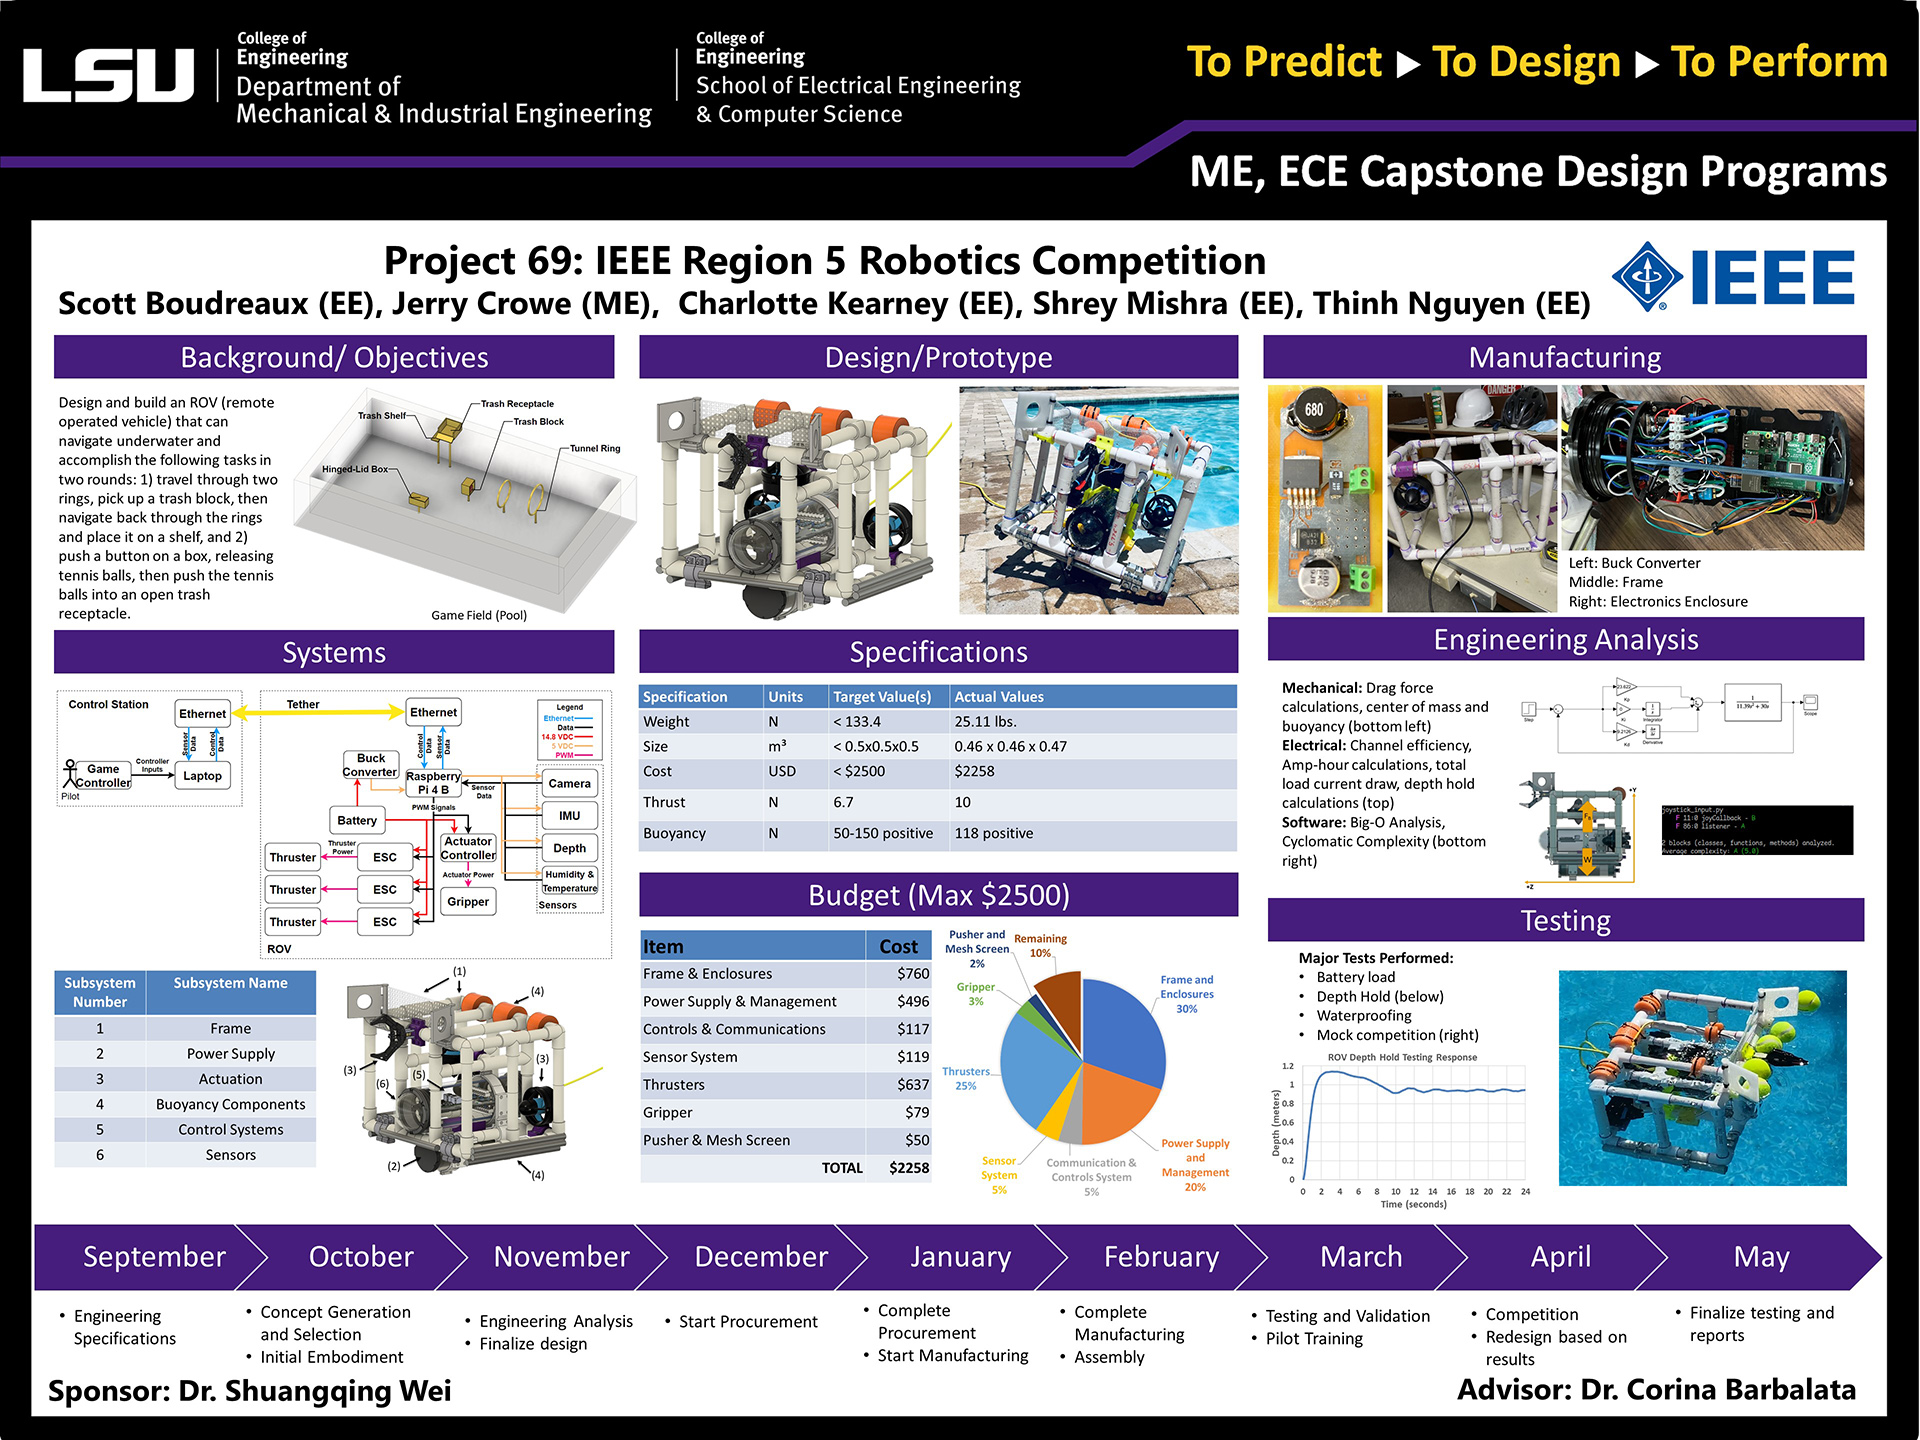 Project 69: IEEE Region 5 Robot Competition  (2022)